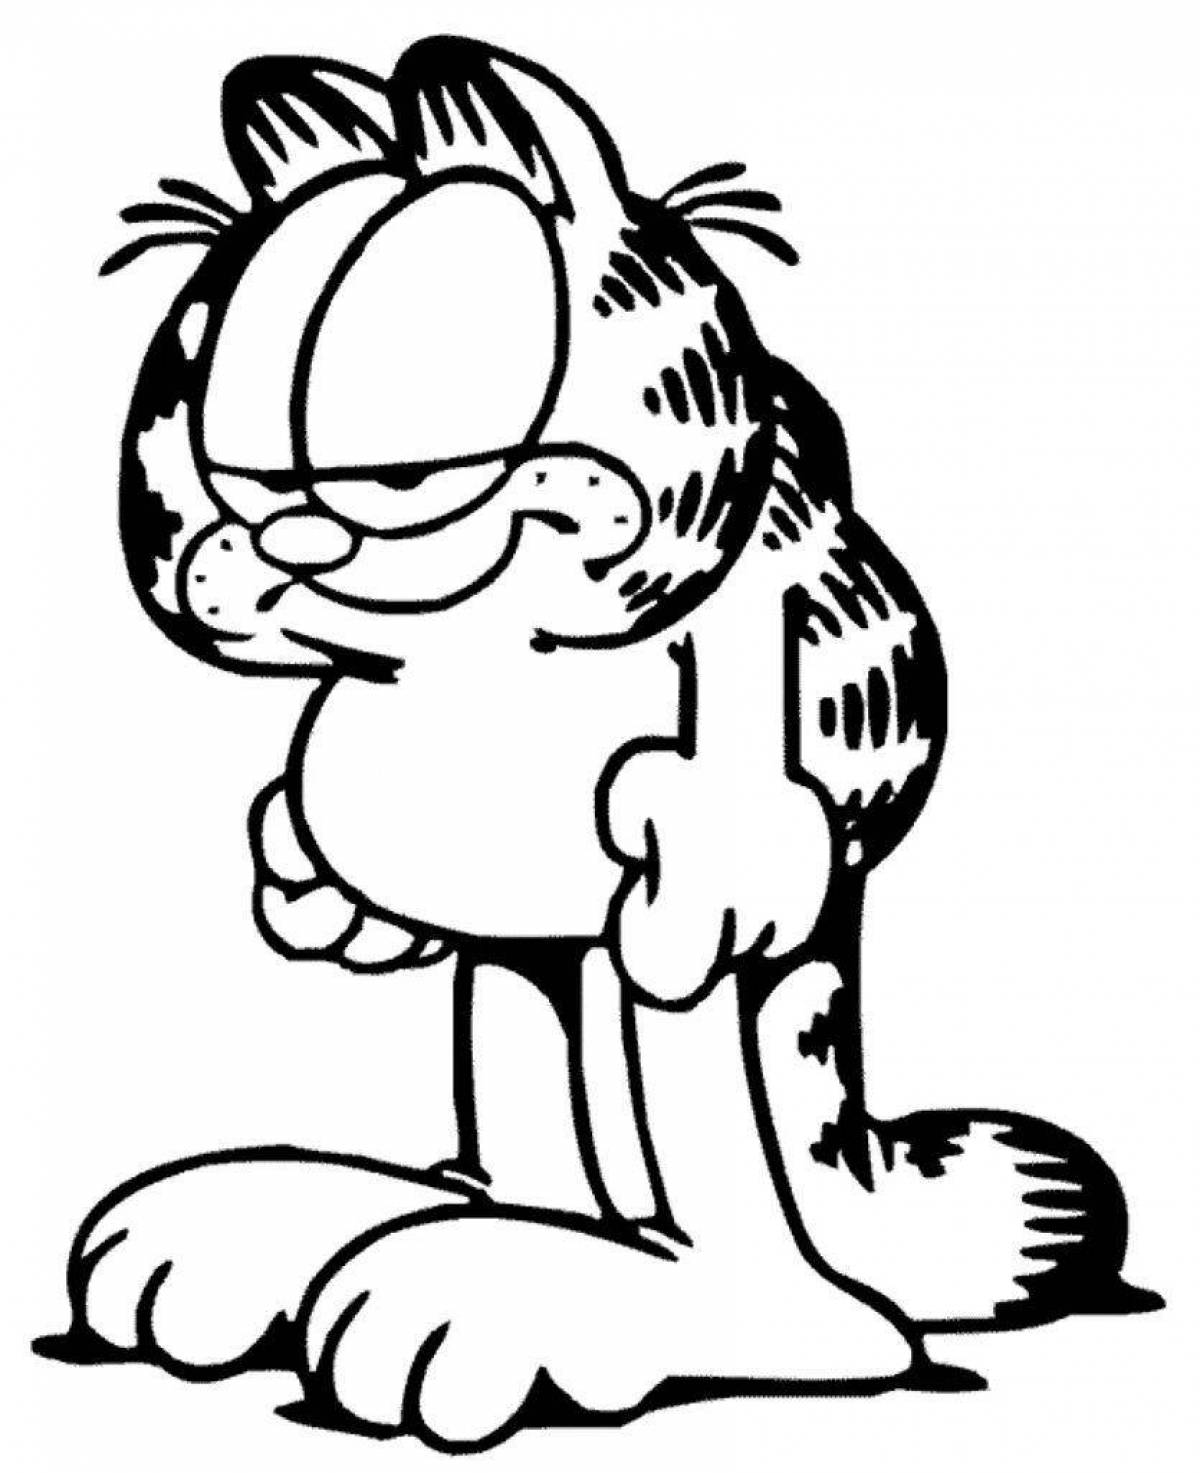 Coloring page adorable cat garfield